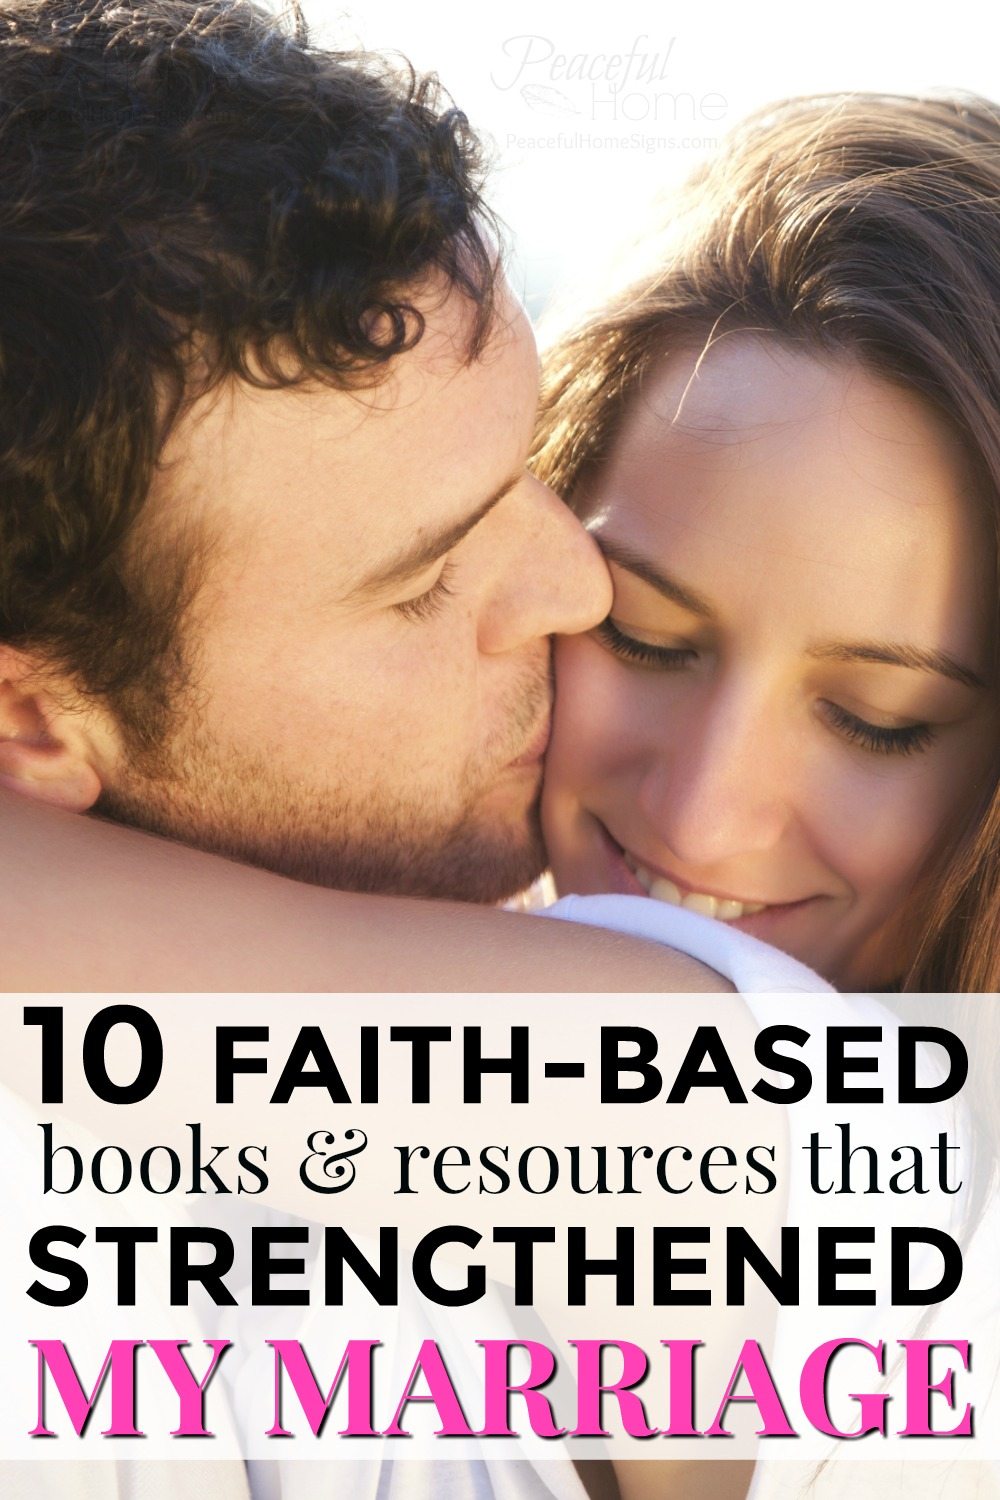 Christian marriage, marriage books, faith based marriage, God centered marriage, how to save a marriage, resources for marriage, Christian marriage help